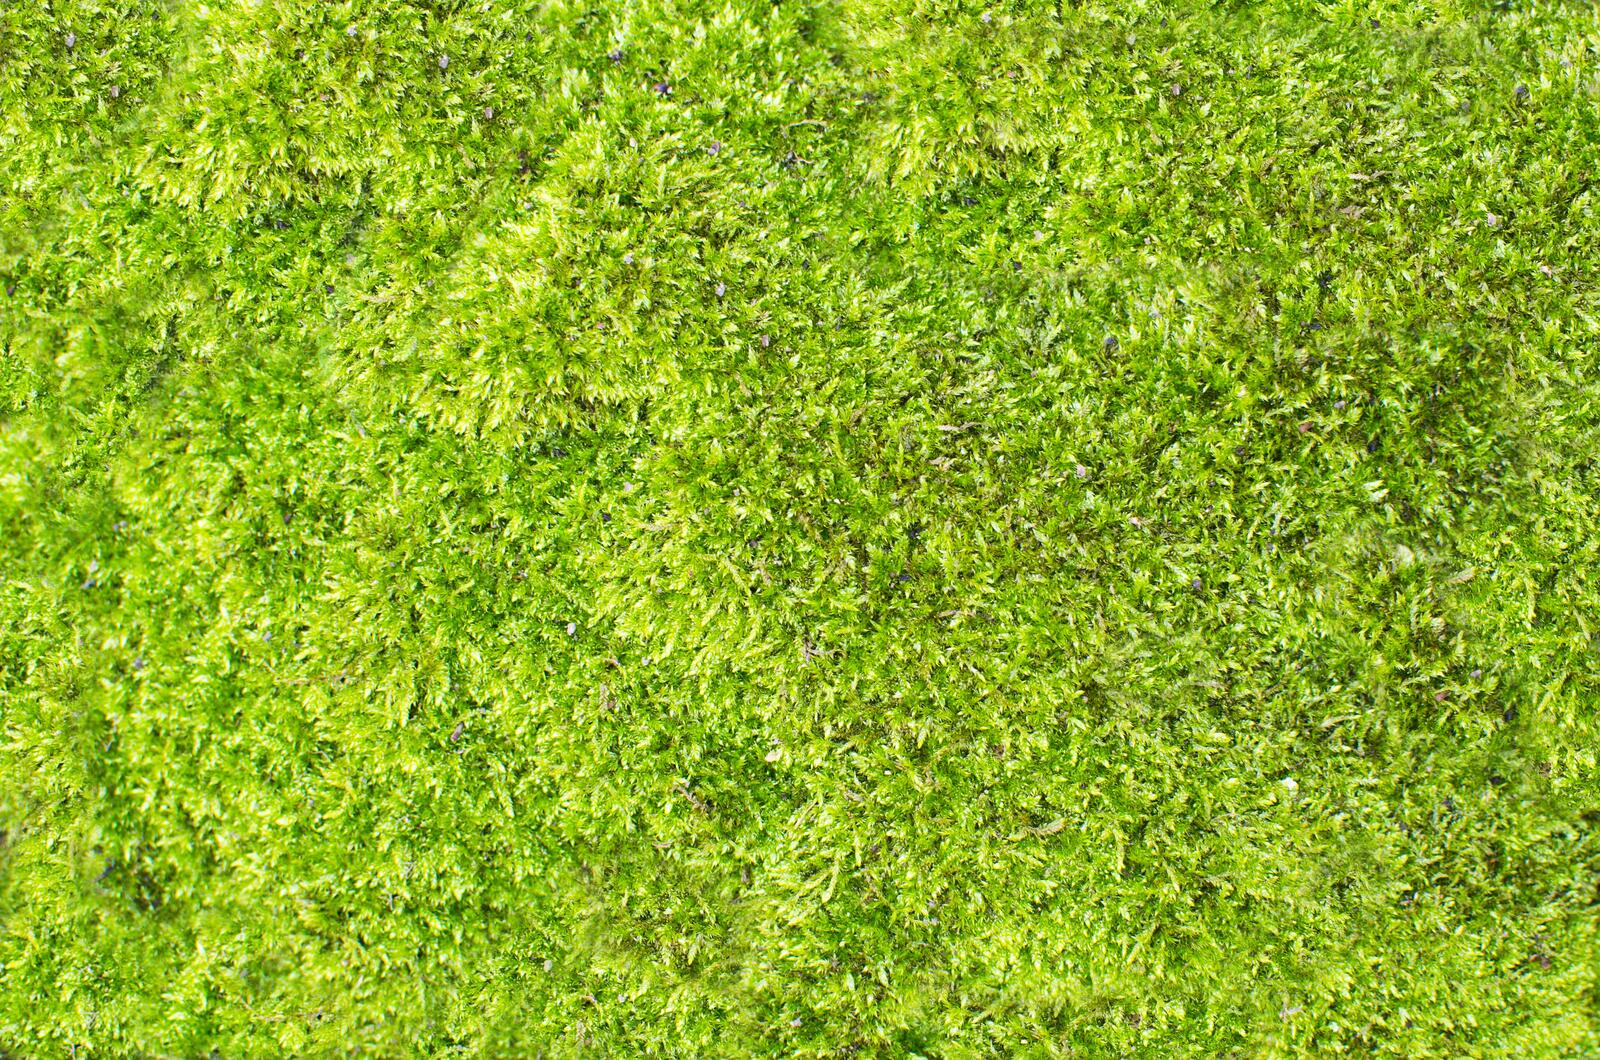 Free photo Bright green lawn on top